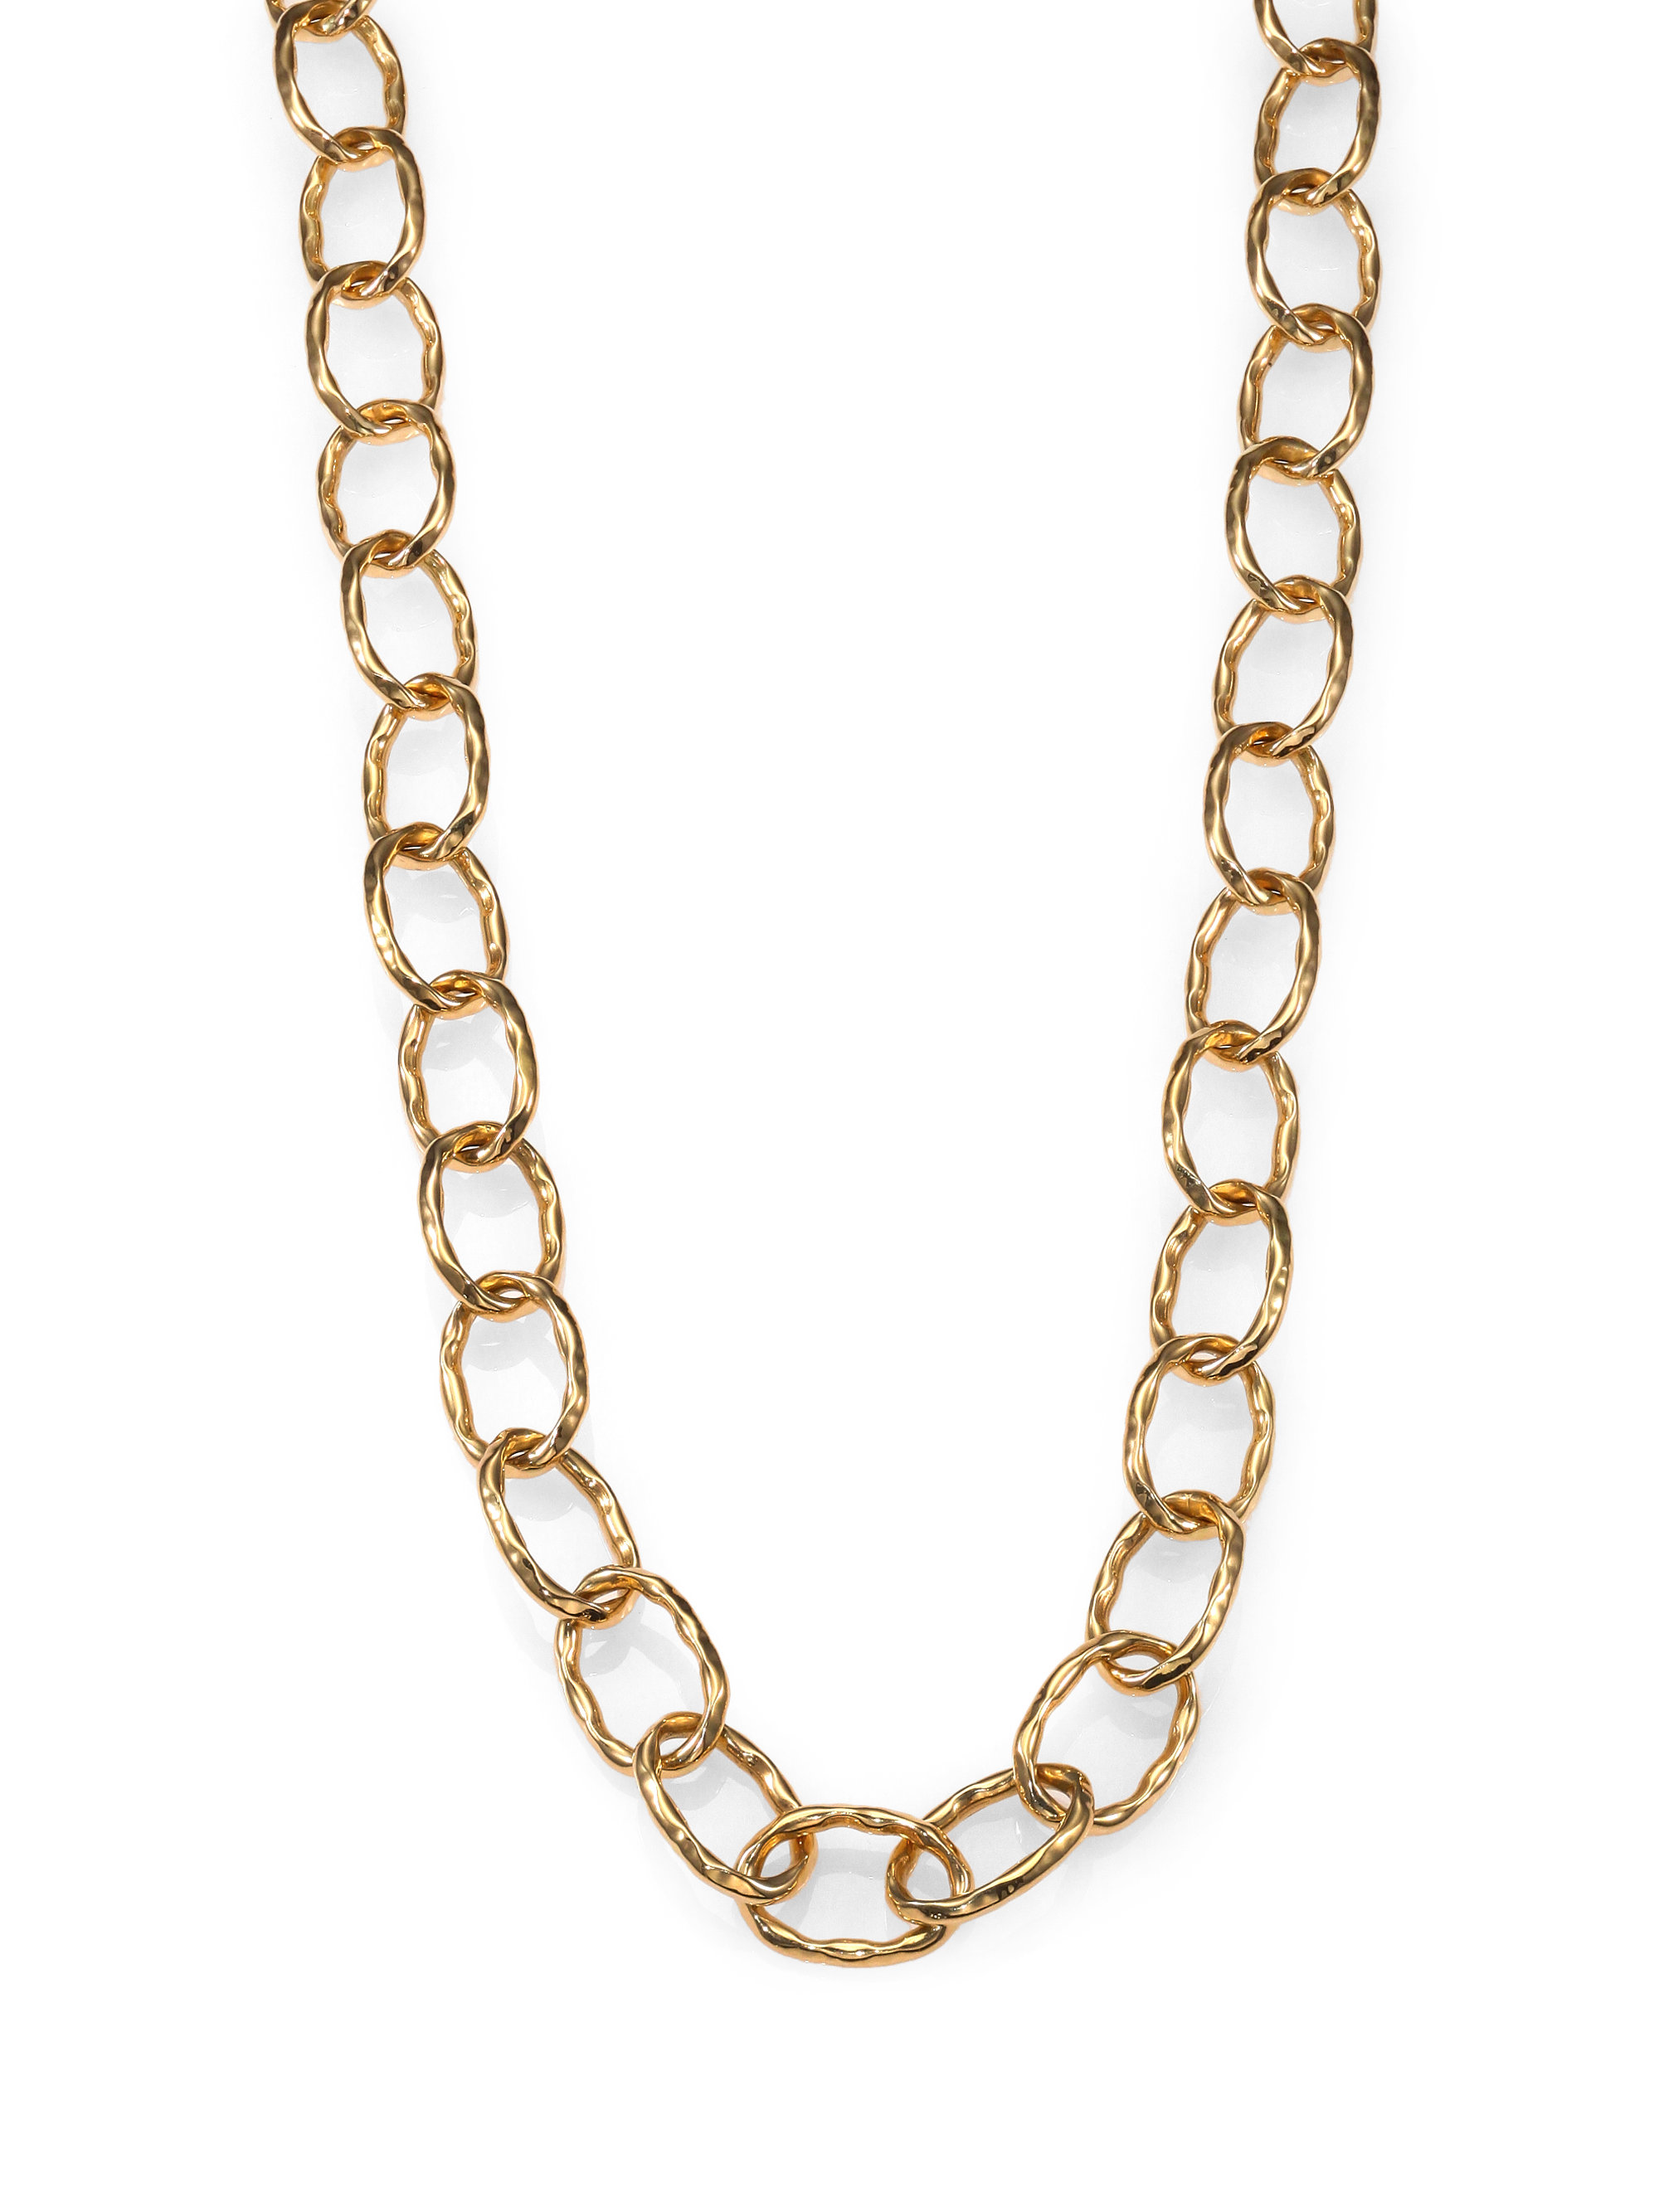 Roberto Coin 18k Gold Hammered Chain Link Necklace in Gold ...